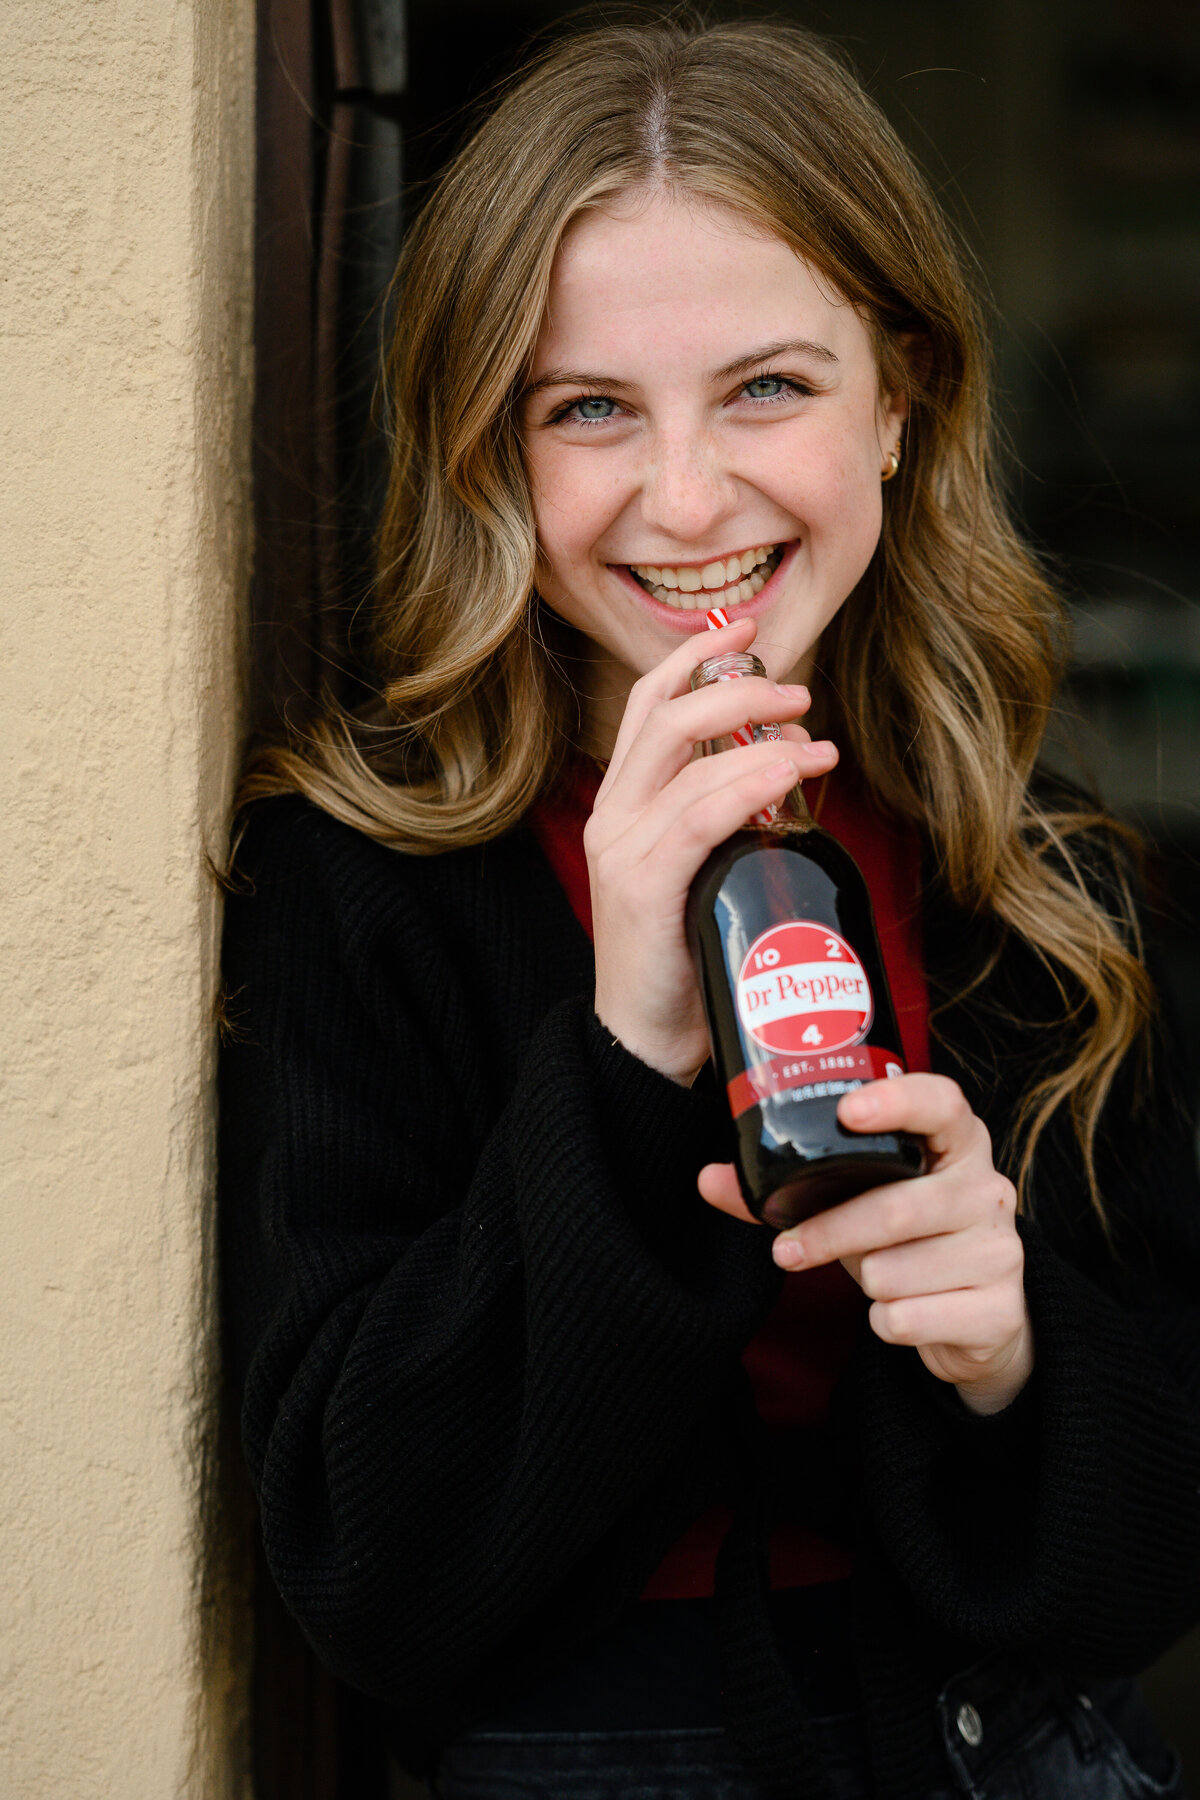 Denver senior Photographer captures a young girl smiling at the camera while drinking a glass bottle of dr pepper